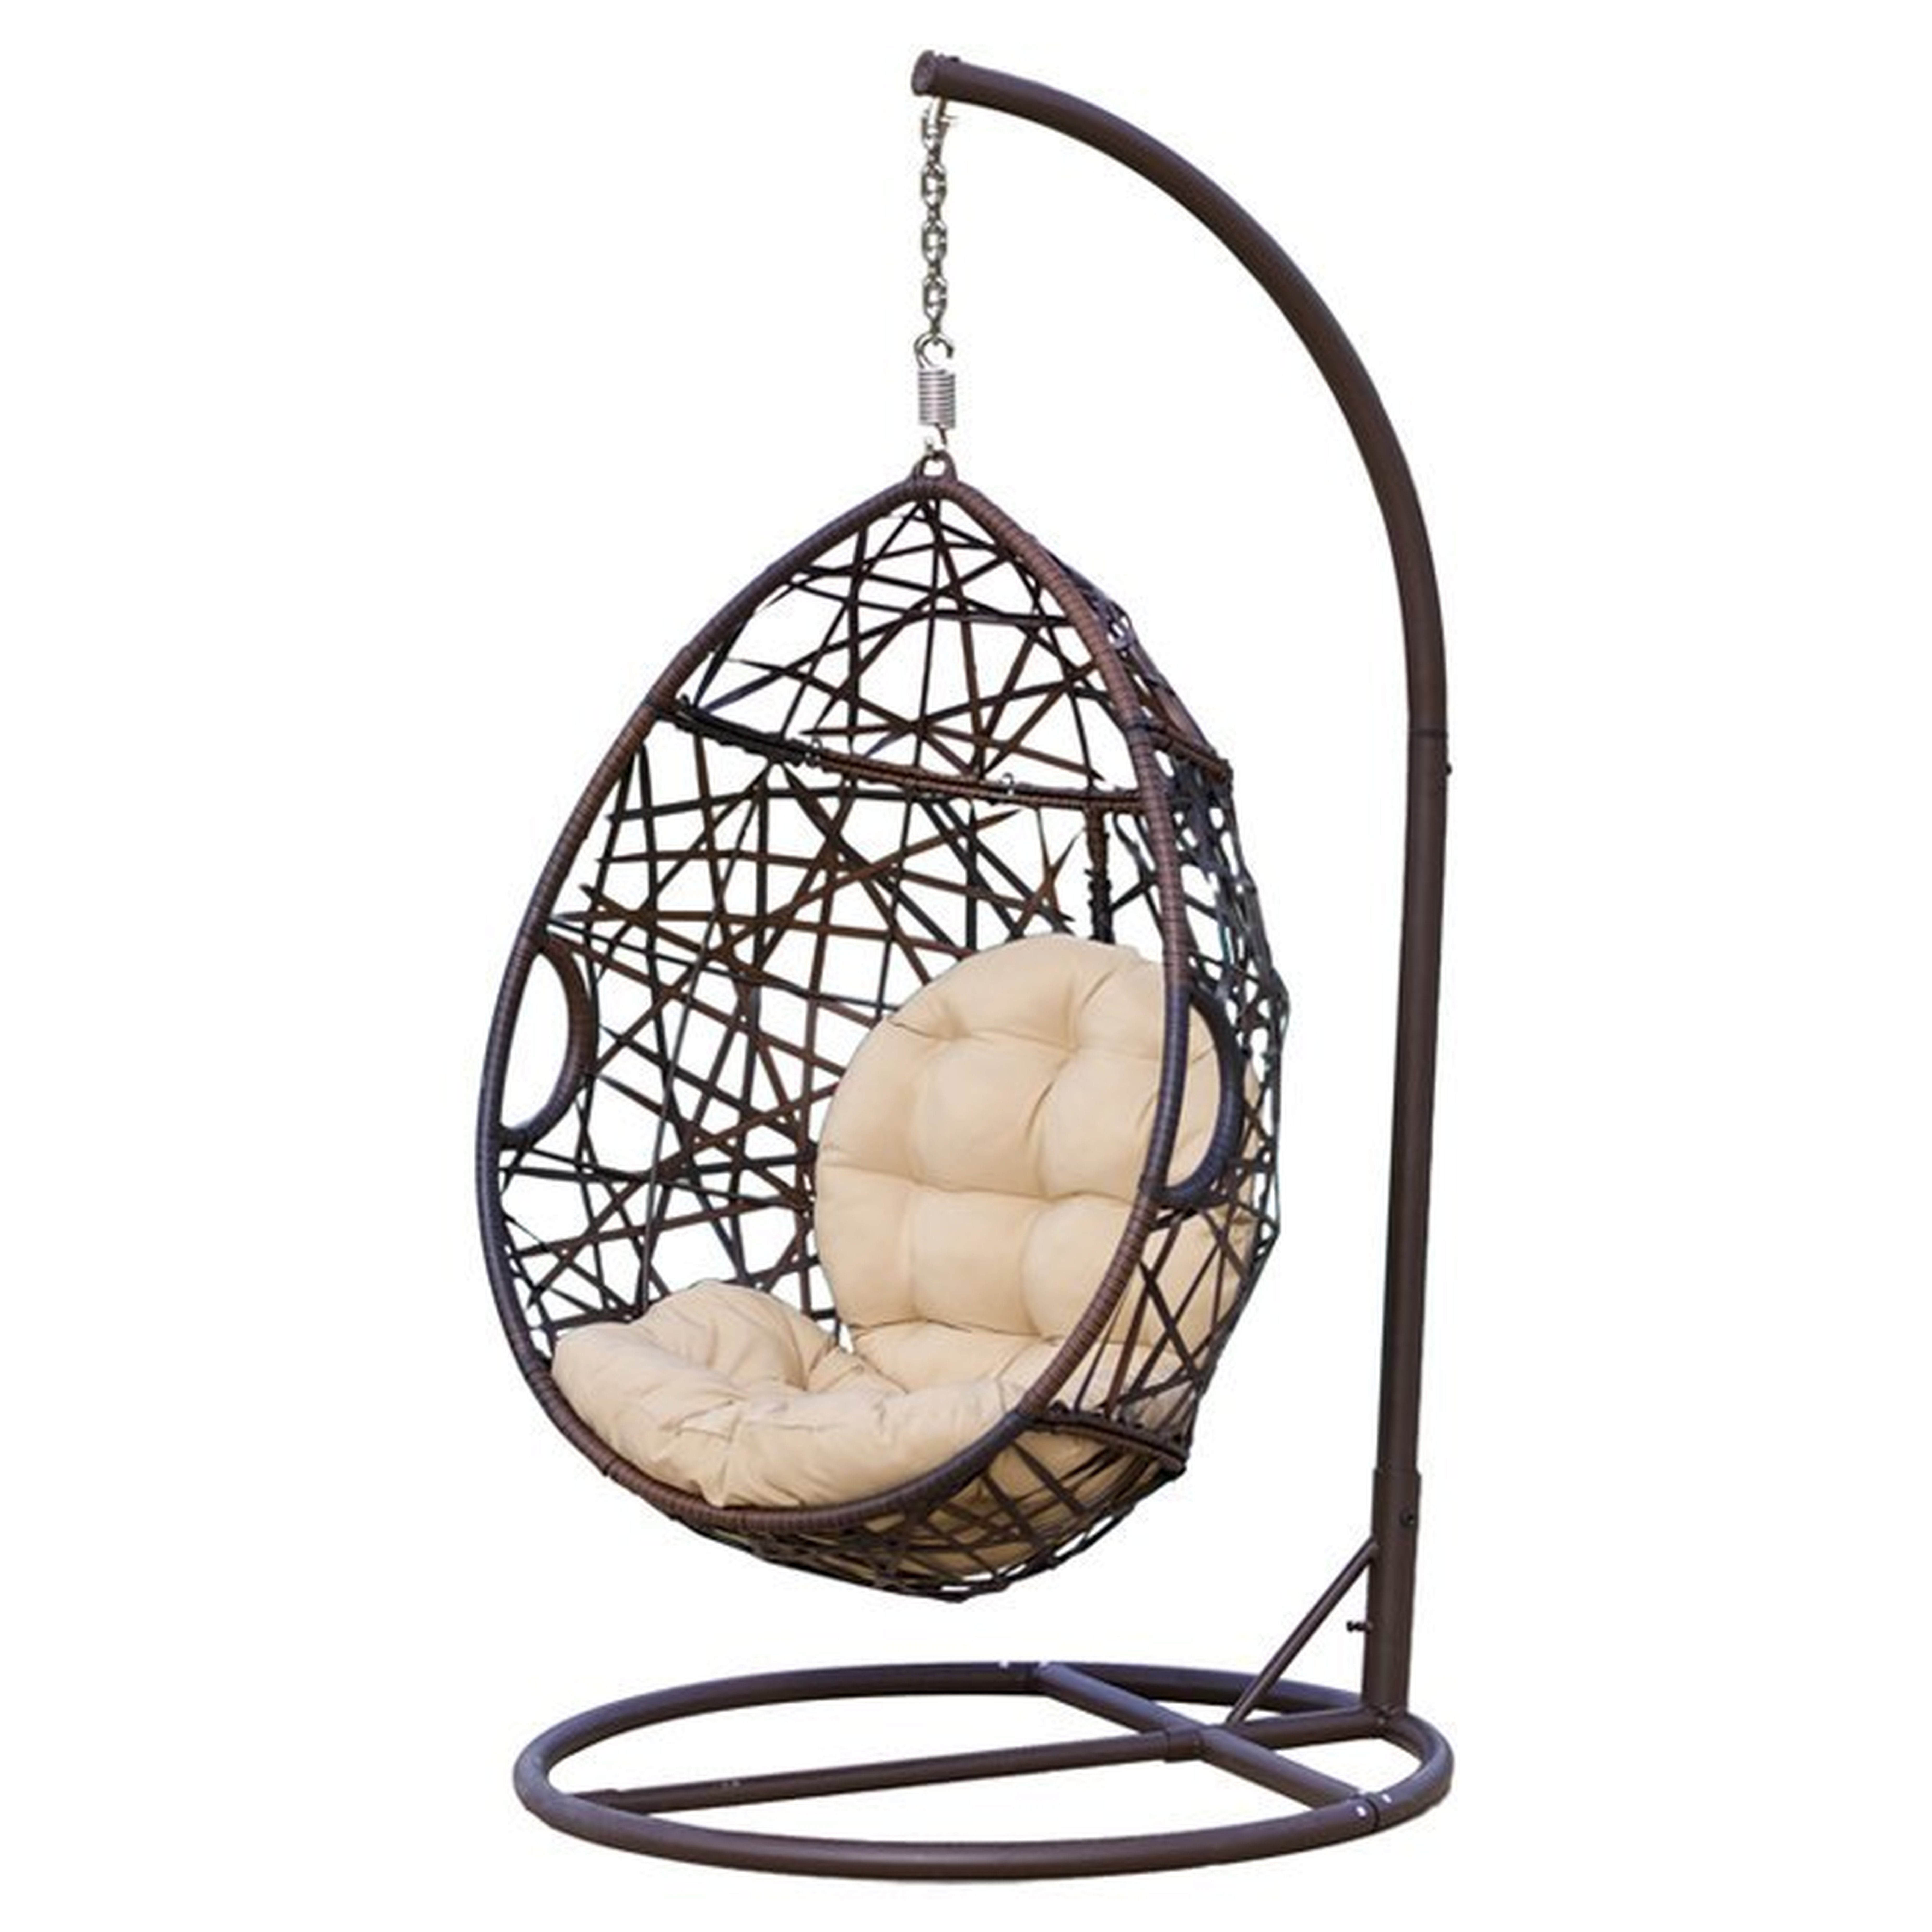 Anner Tear Drop Swing Chair with Stand - Wayfair